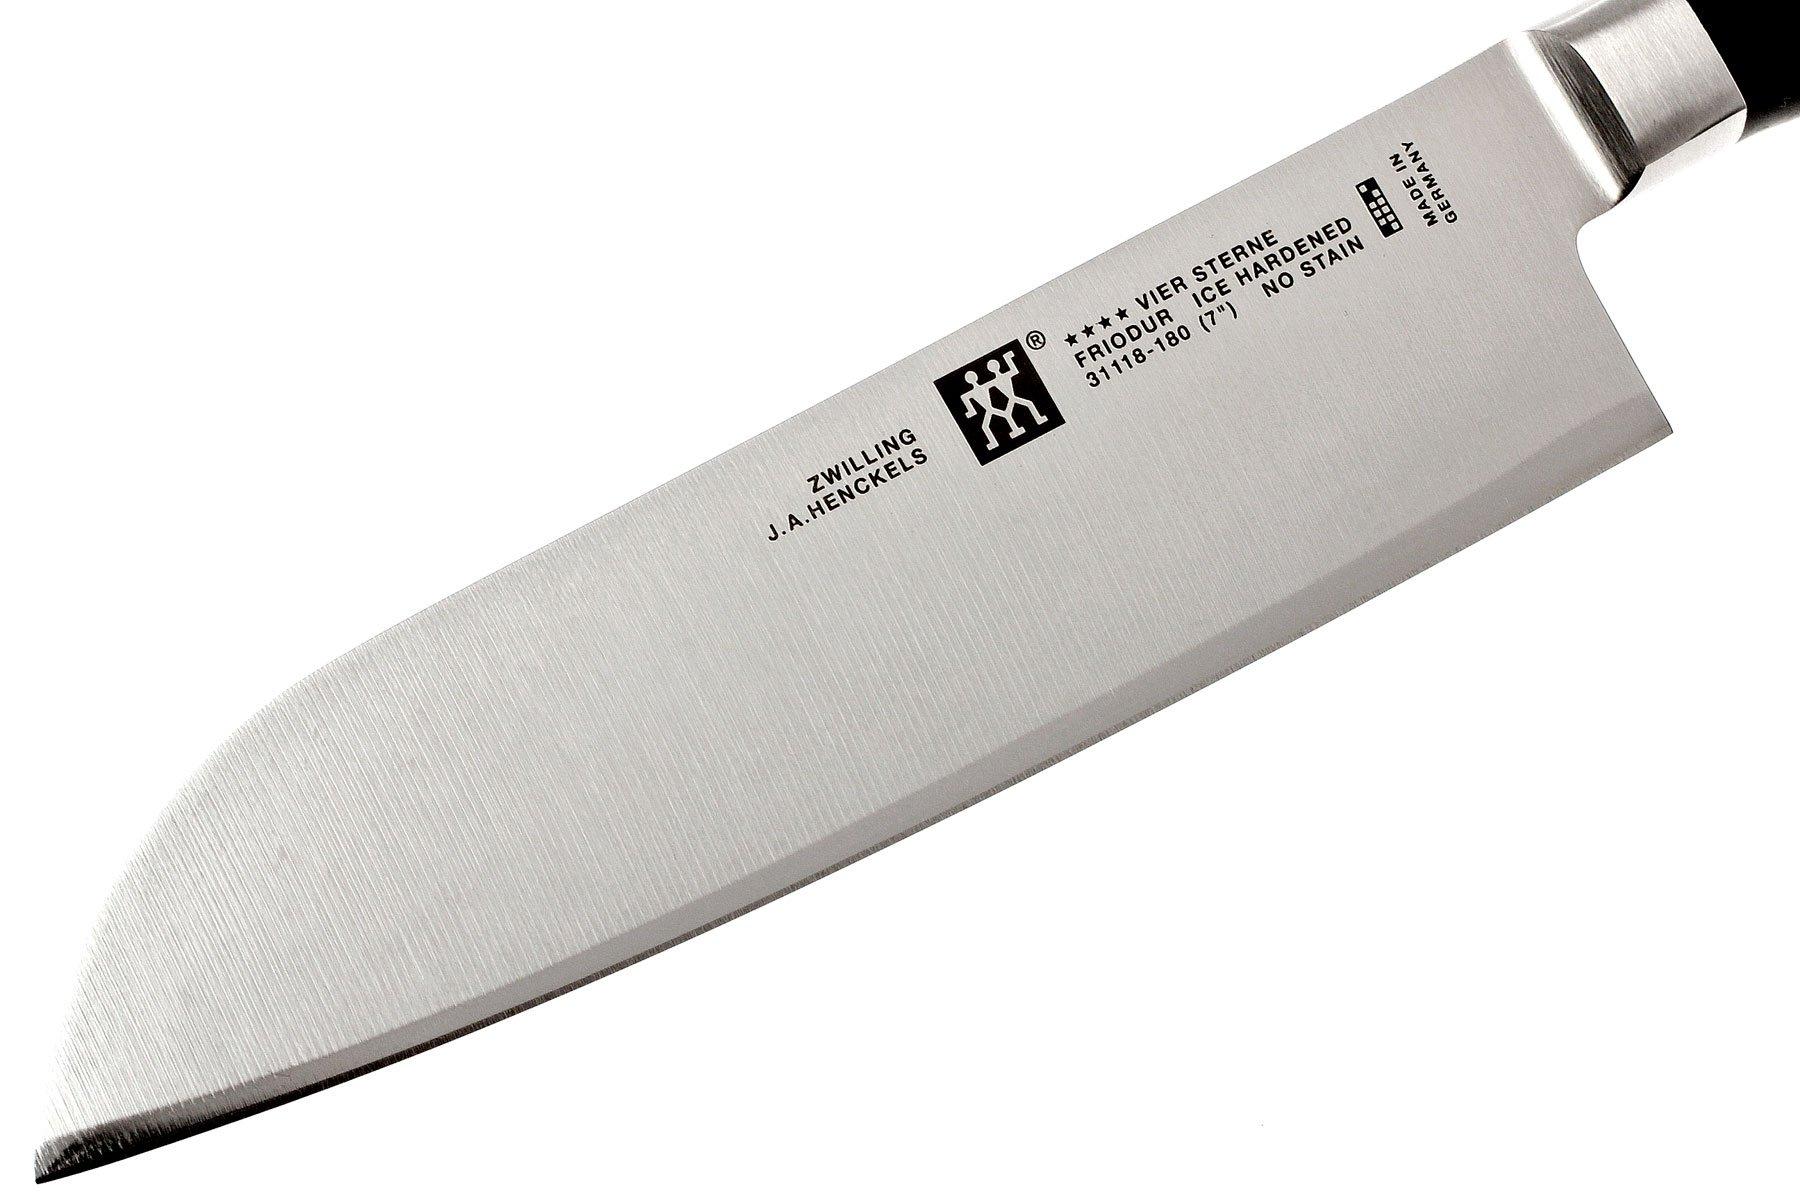 Zwilling J.A. Henckels Four Star Santoku knife 7" | Advantageously shopping at